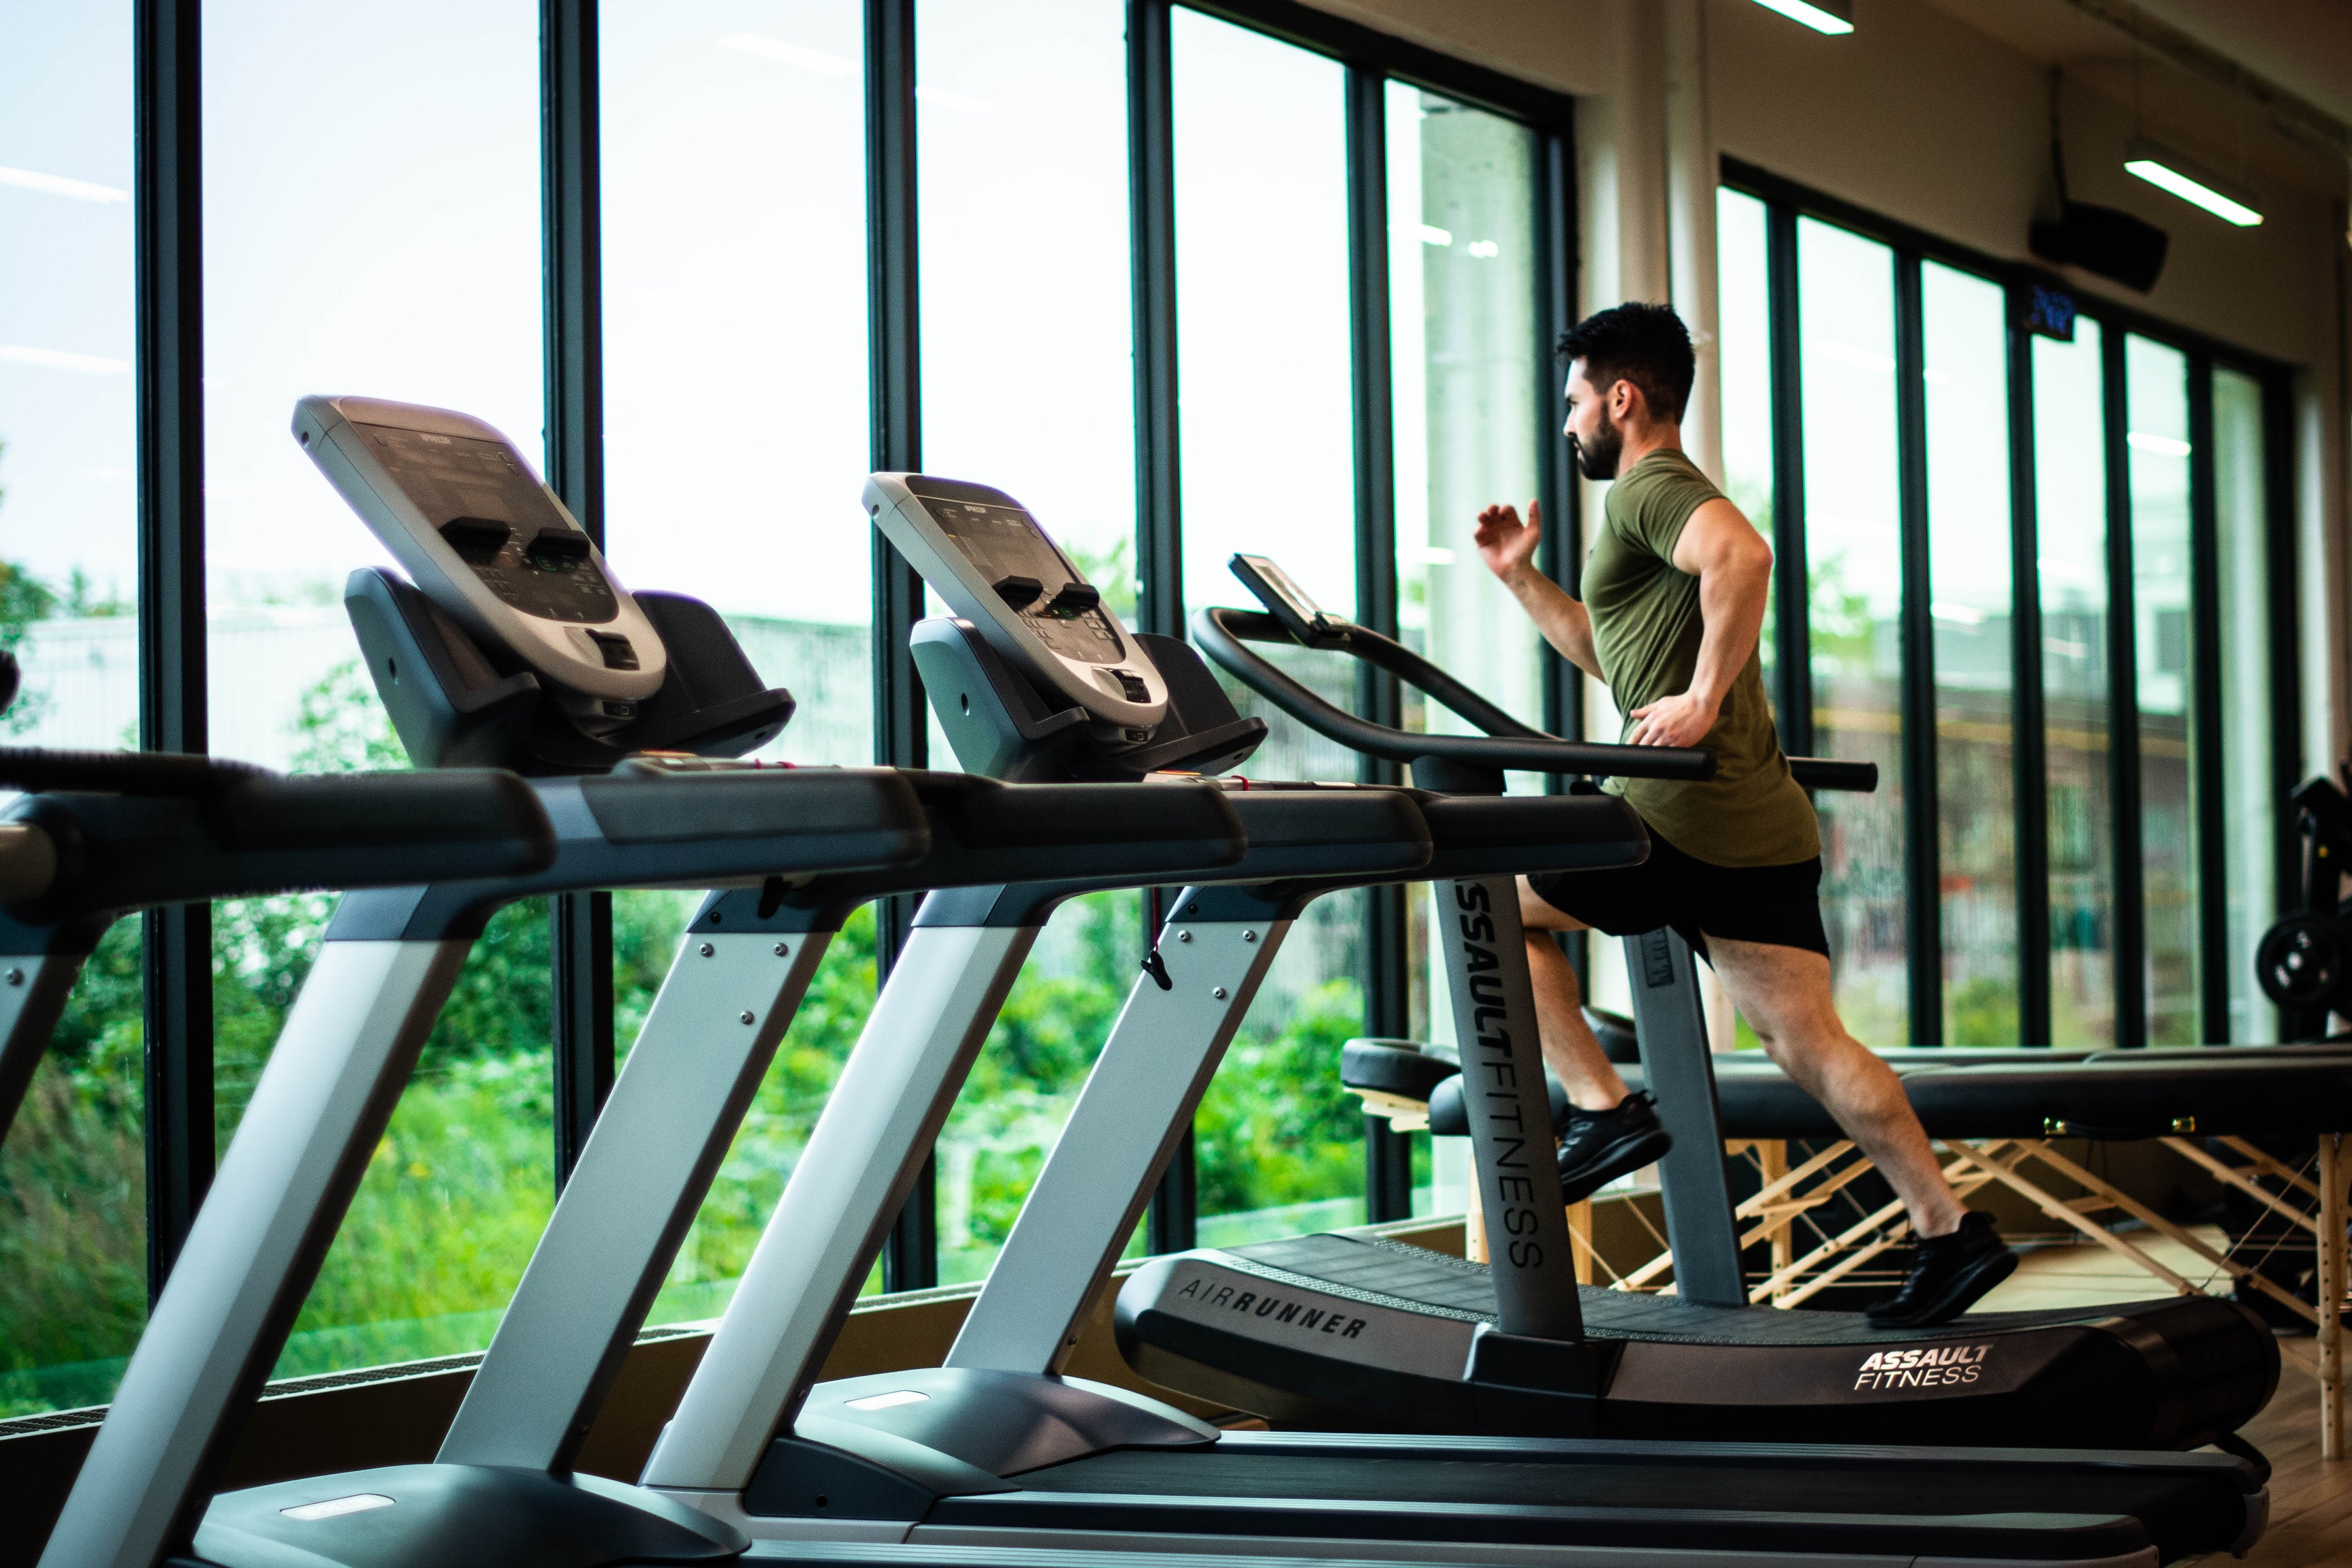 Cardio: Everything You Need to Know About Cardio Exercise